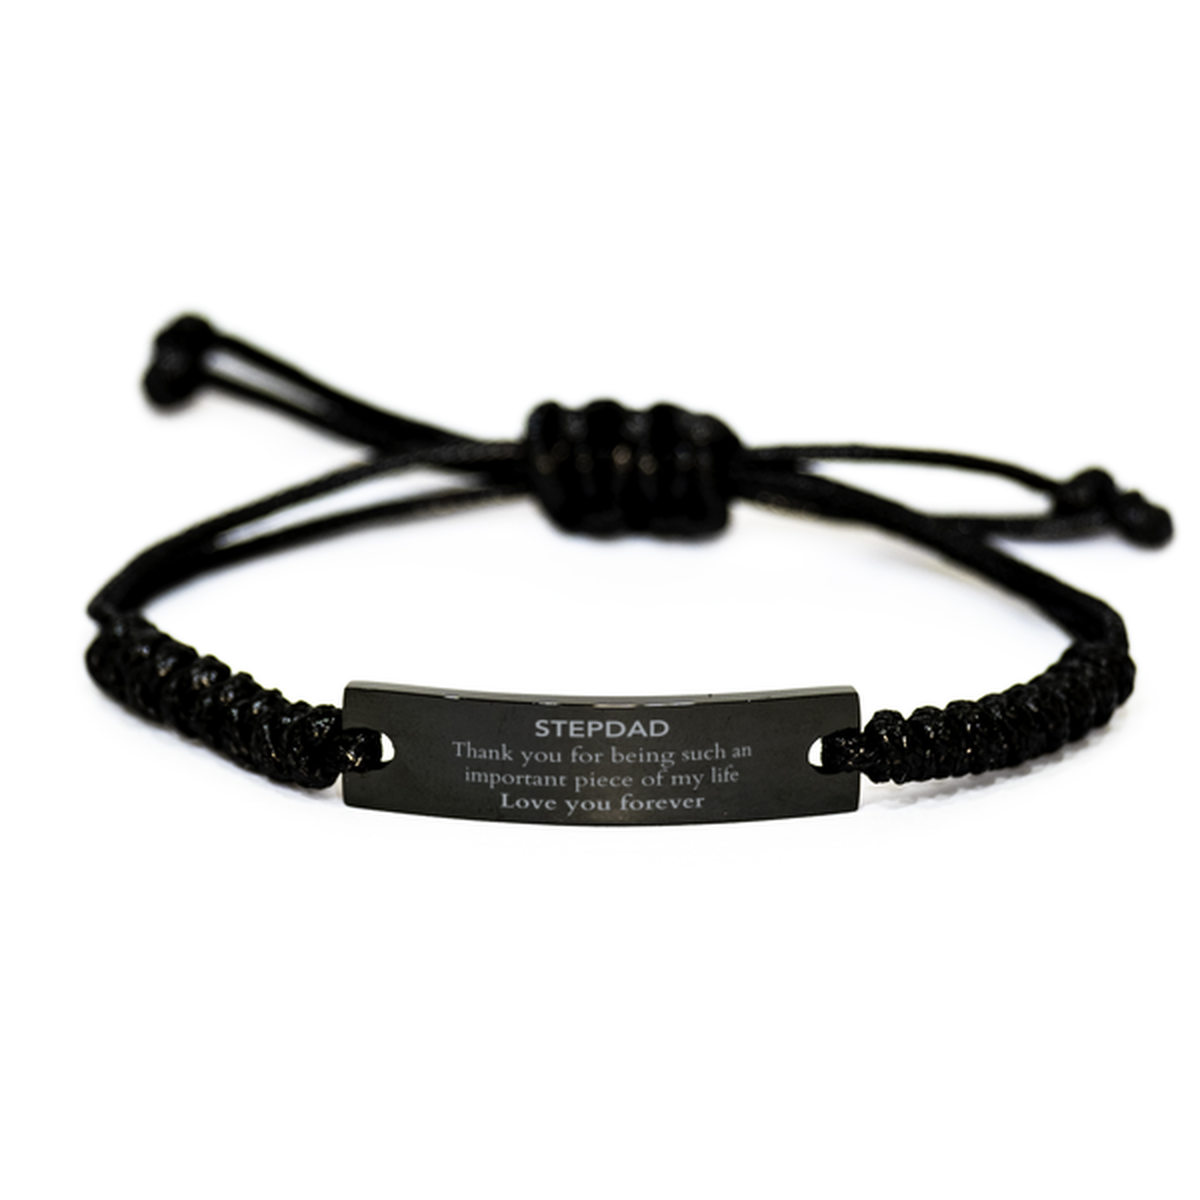 Appropriate Stepdad Black Rope Bracelet Epic Birthday Gifts for Stepdad Thank you for being such an important piece of my life Stepdad Christmas Mothers Fathers Day